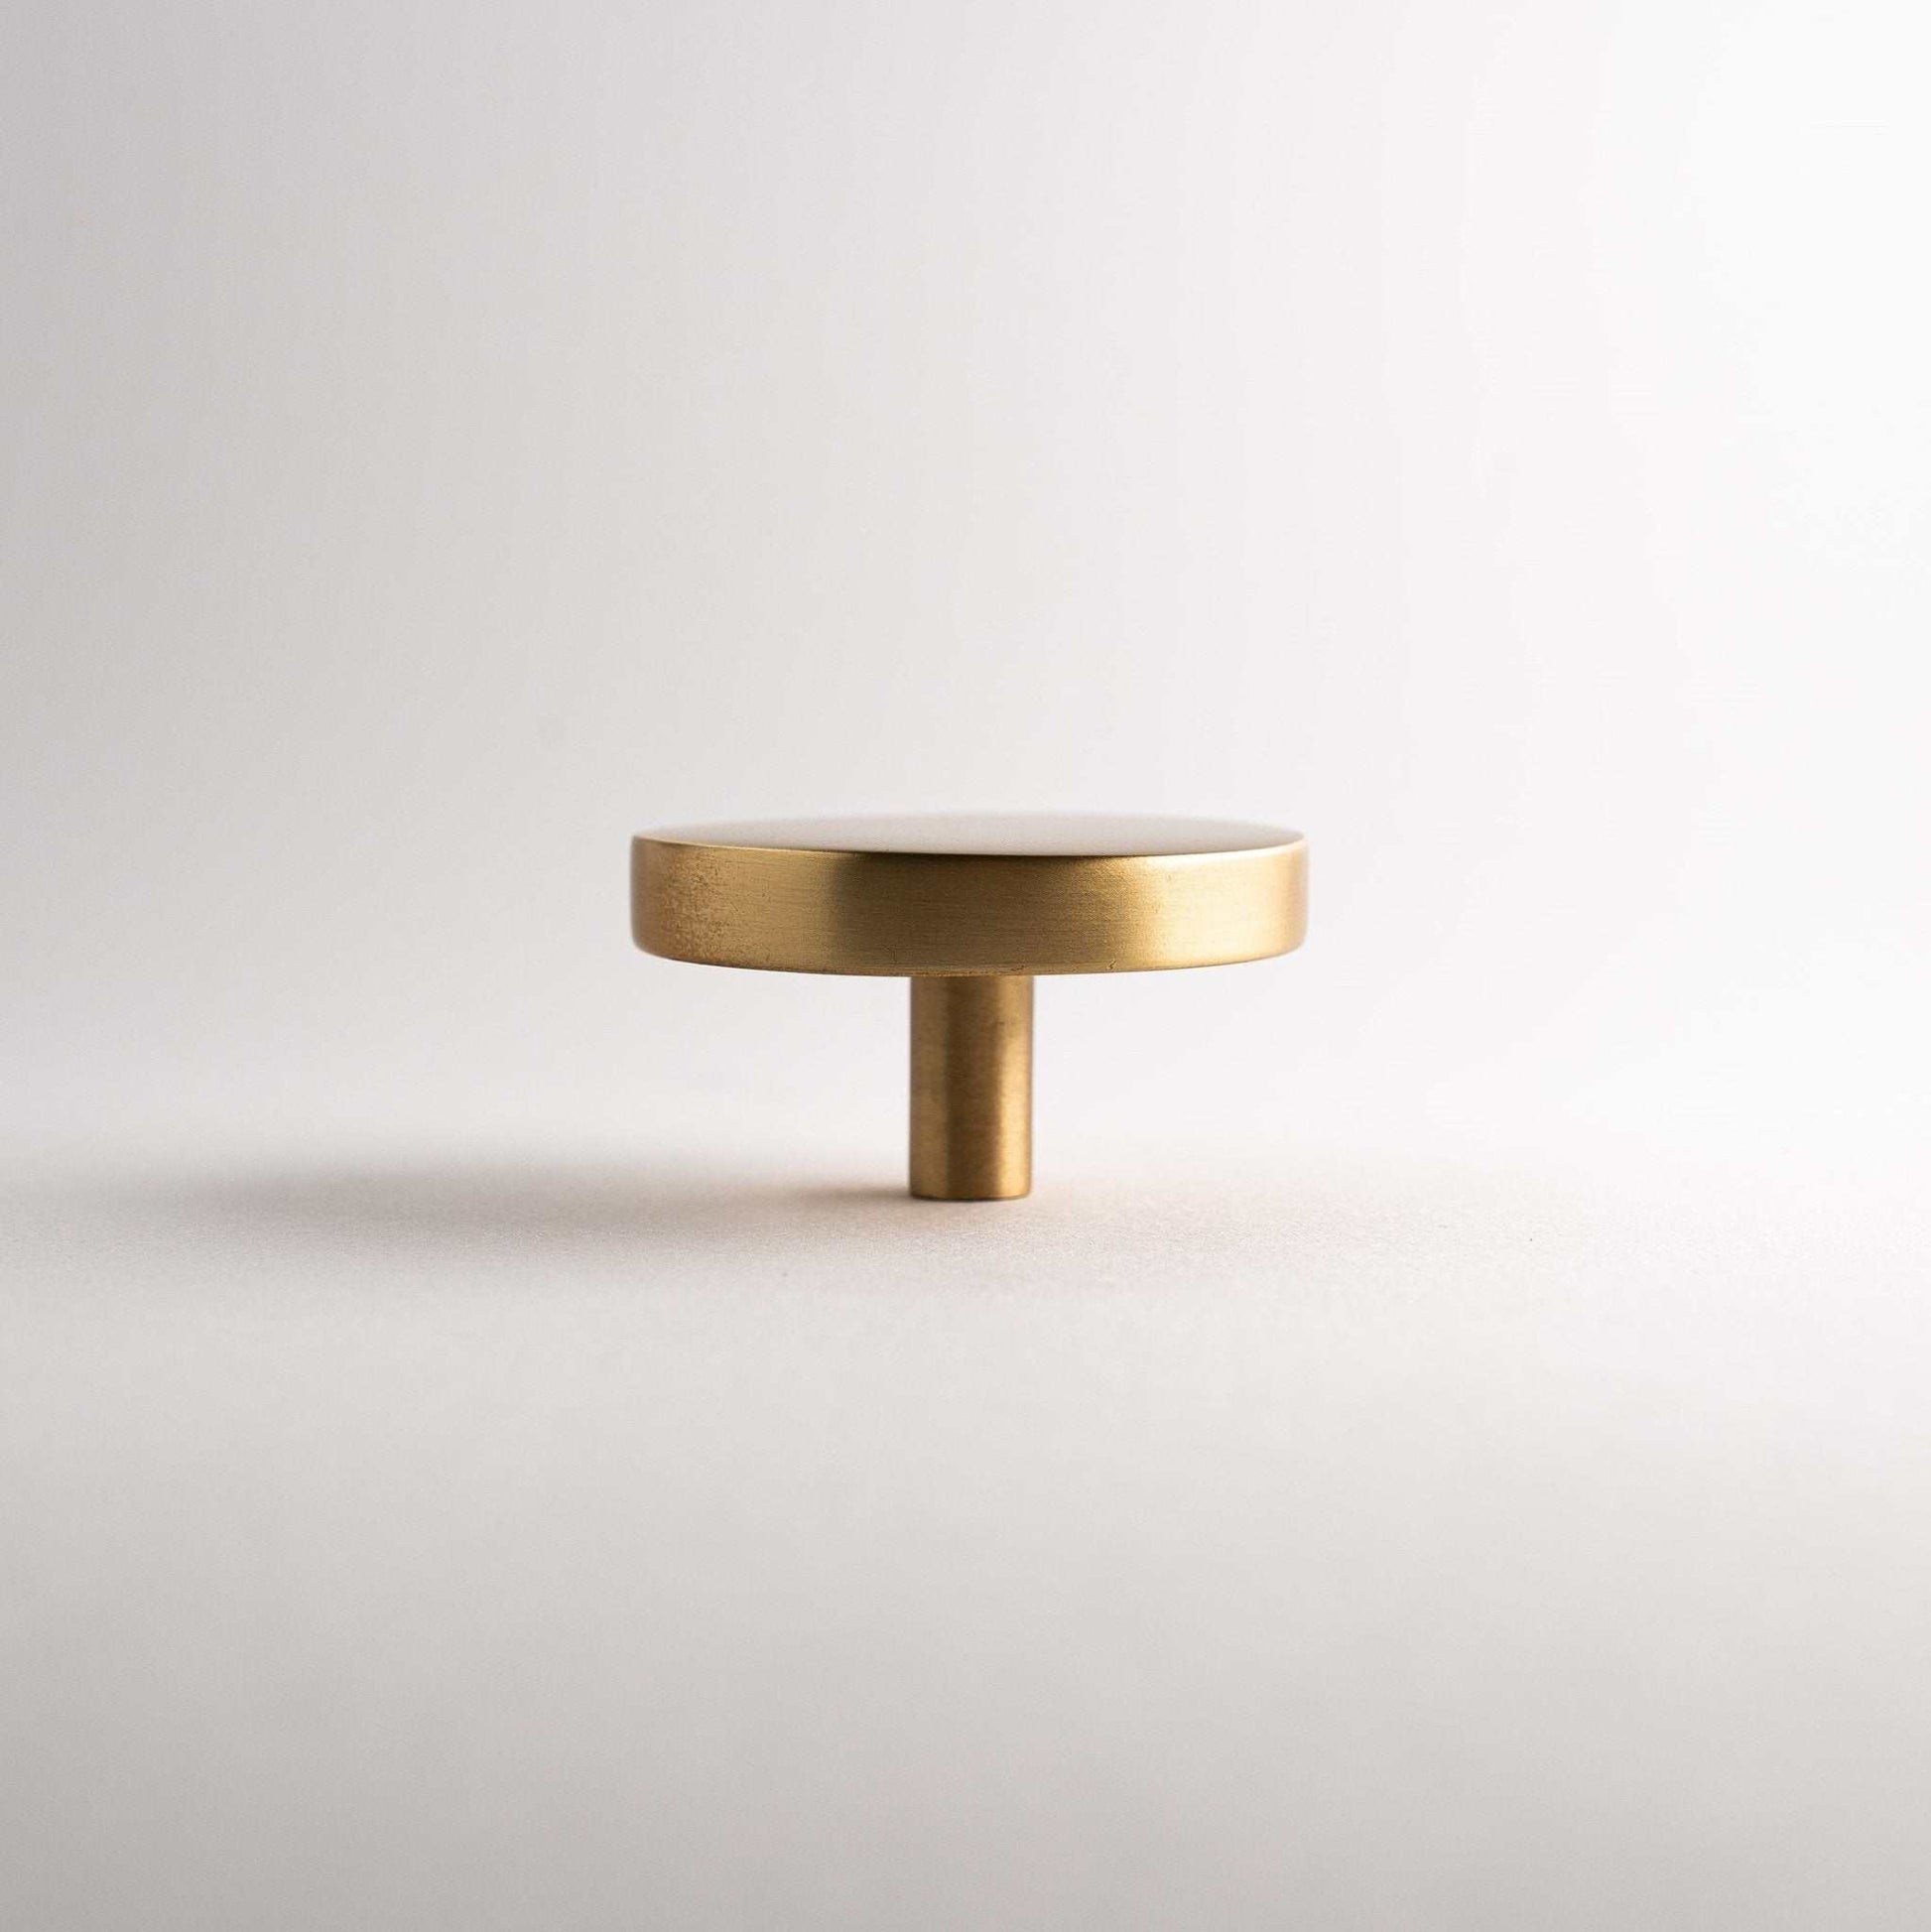 Large round satin brass knob made of solid brass | Inspire Hardware | Available in many sizes and finishes - polished brass, satin brass, antique brass, polished nickel, oil rubbed bronze, matte black